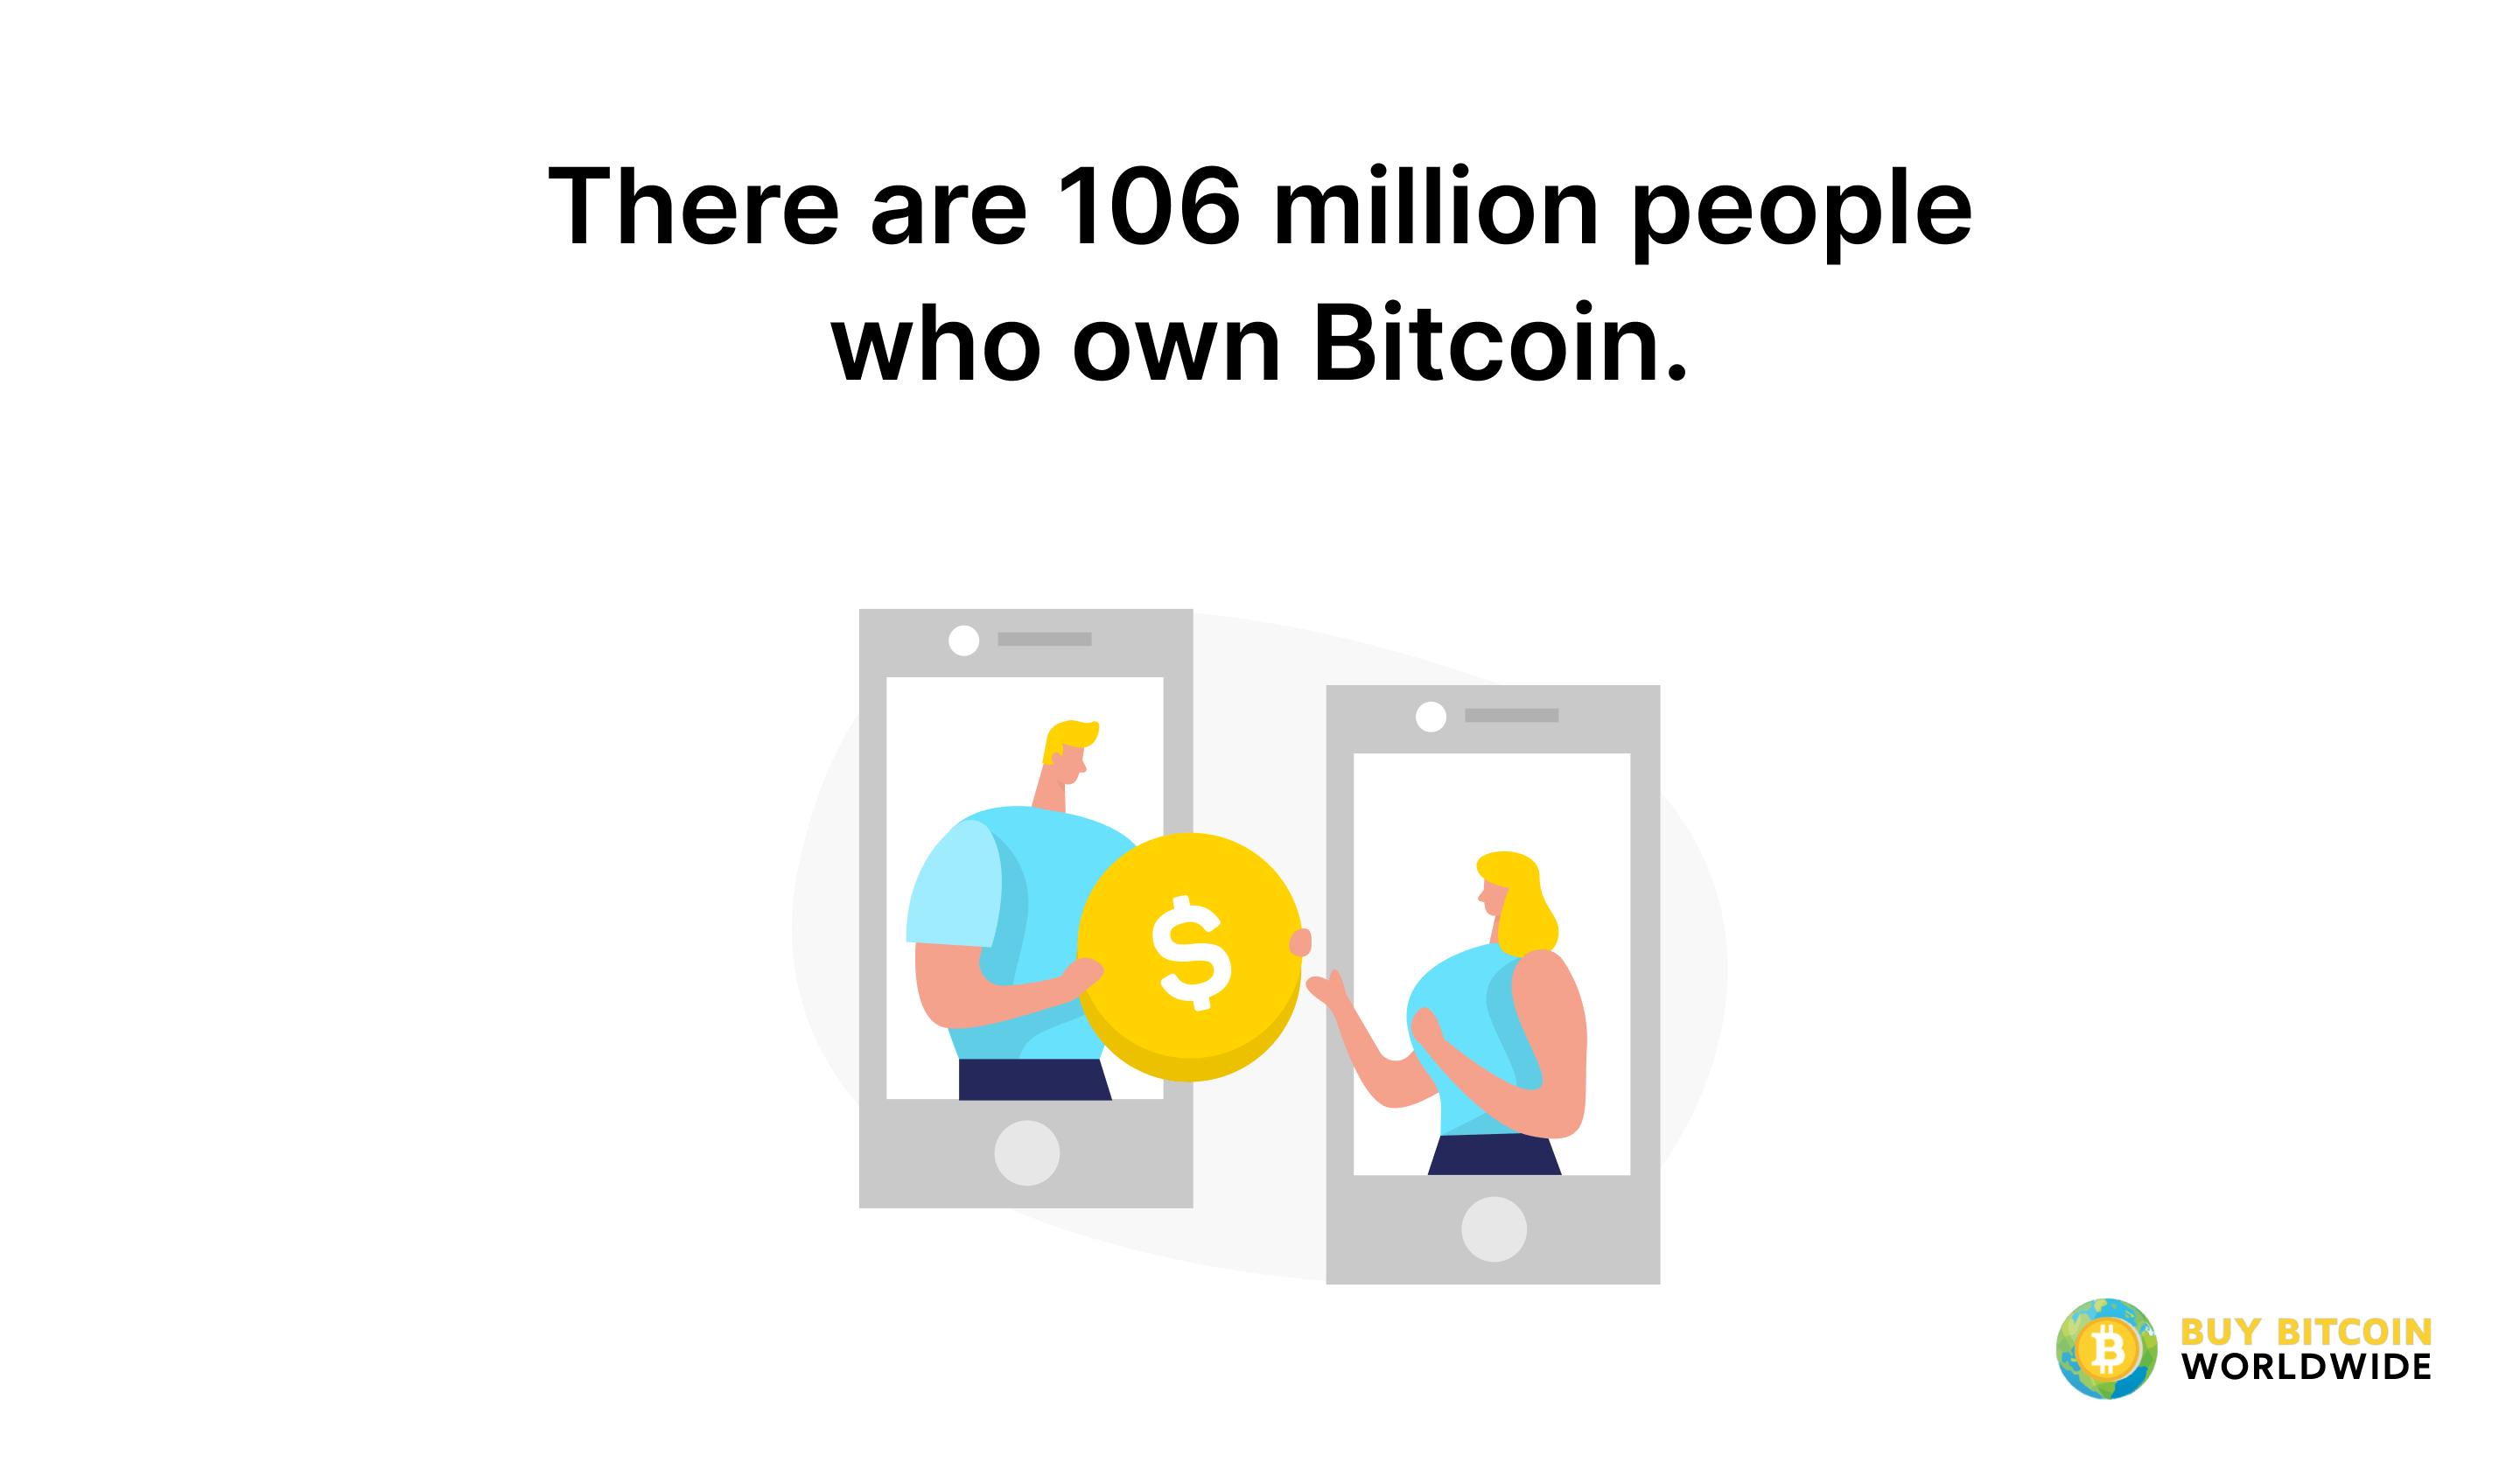 how many people own a bitcoin